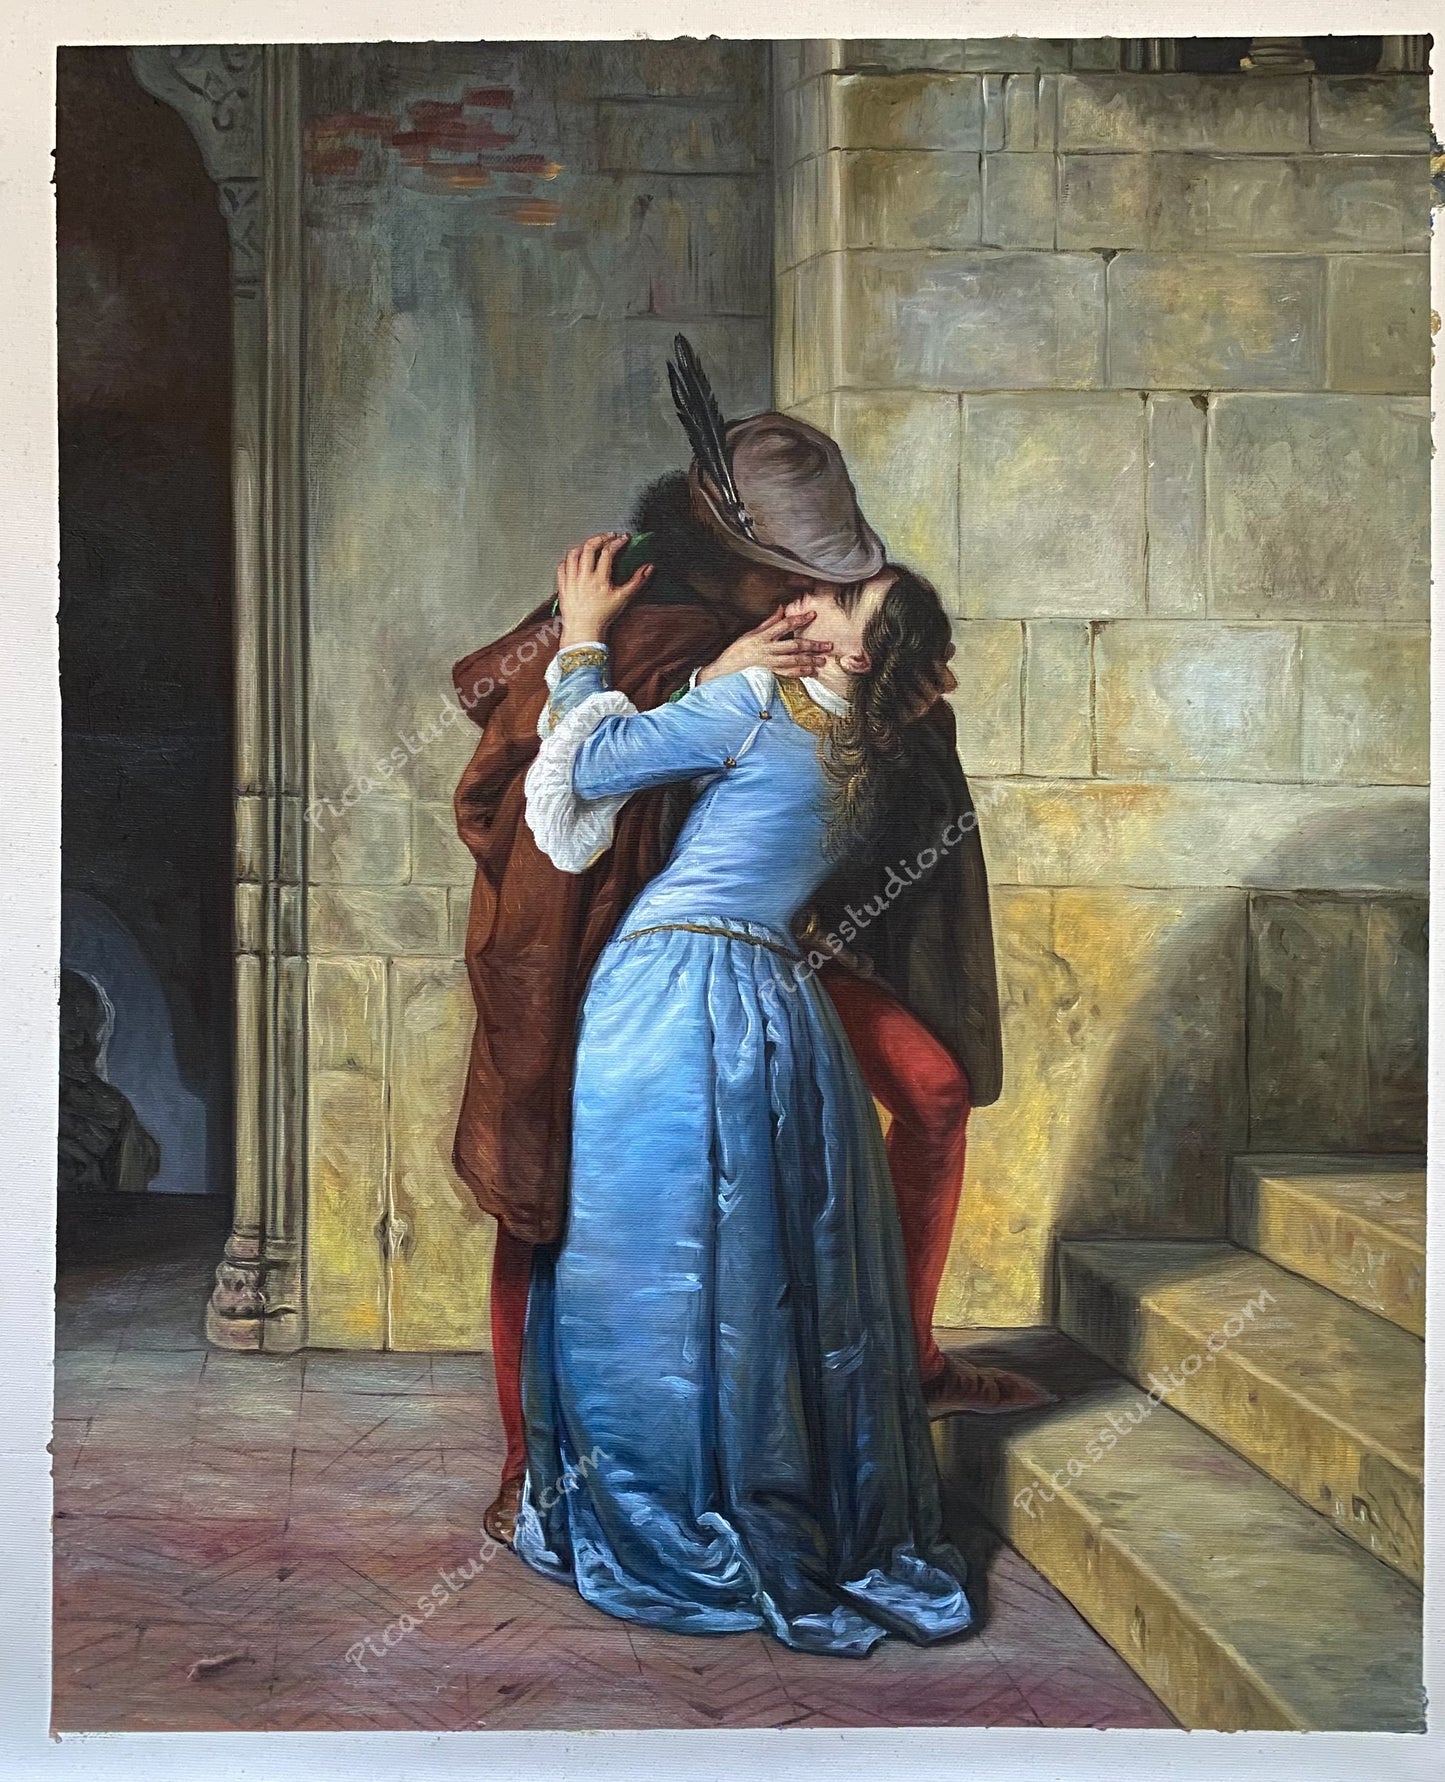 The Kiss by Francesco Hayez Old Master Art Oil Painting Hand Painted on Canvas Vintage Wall Art Decor Unframed